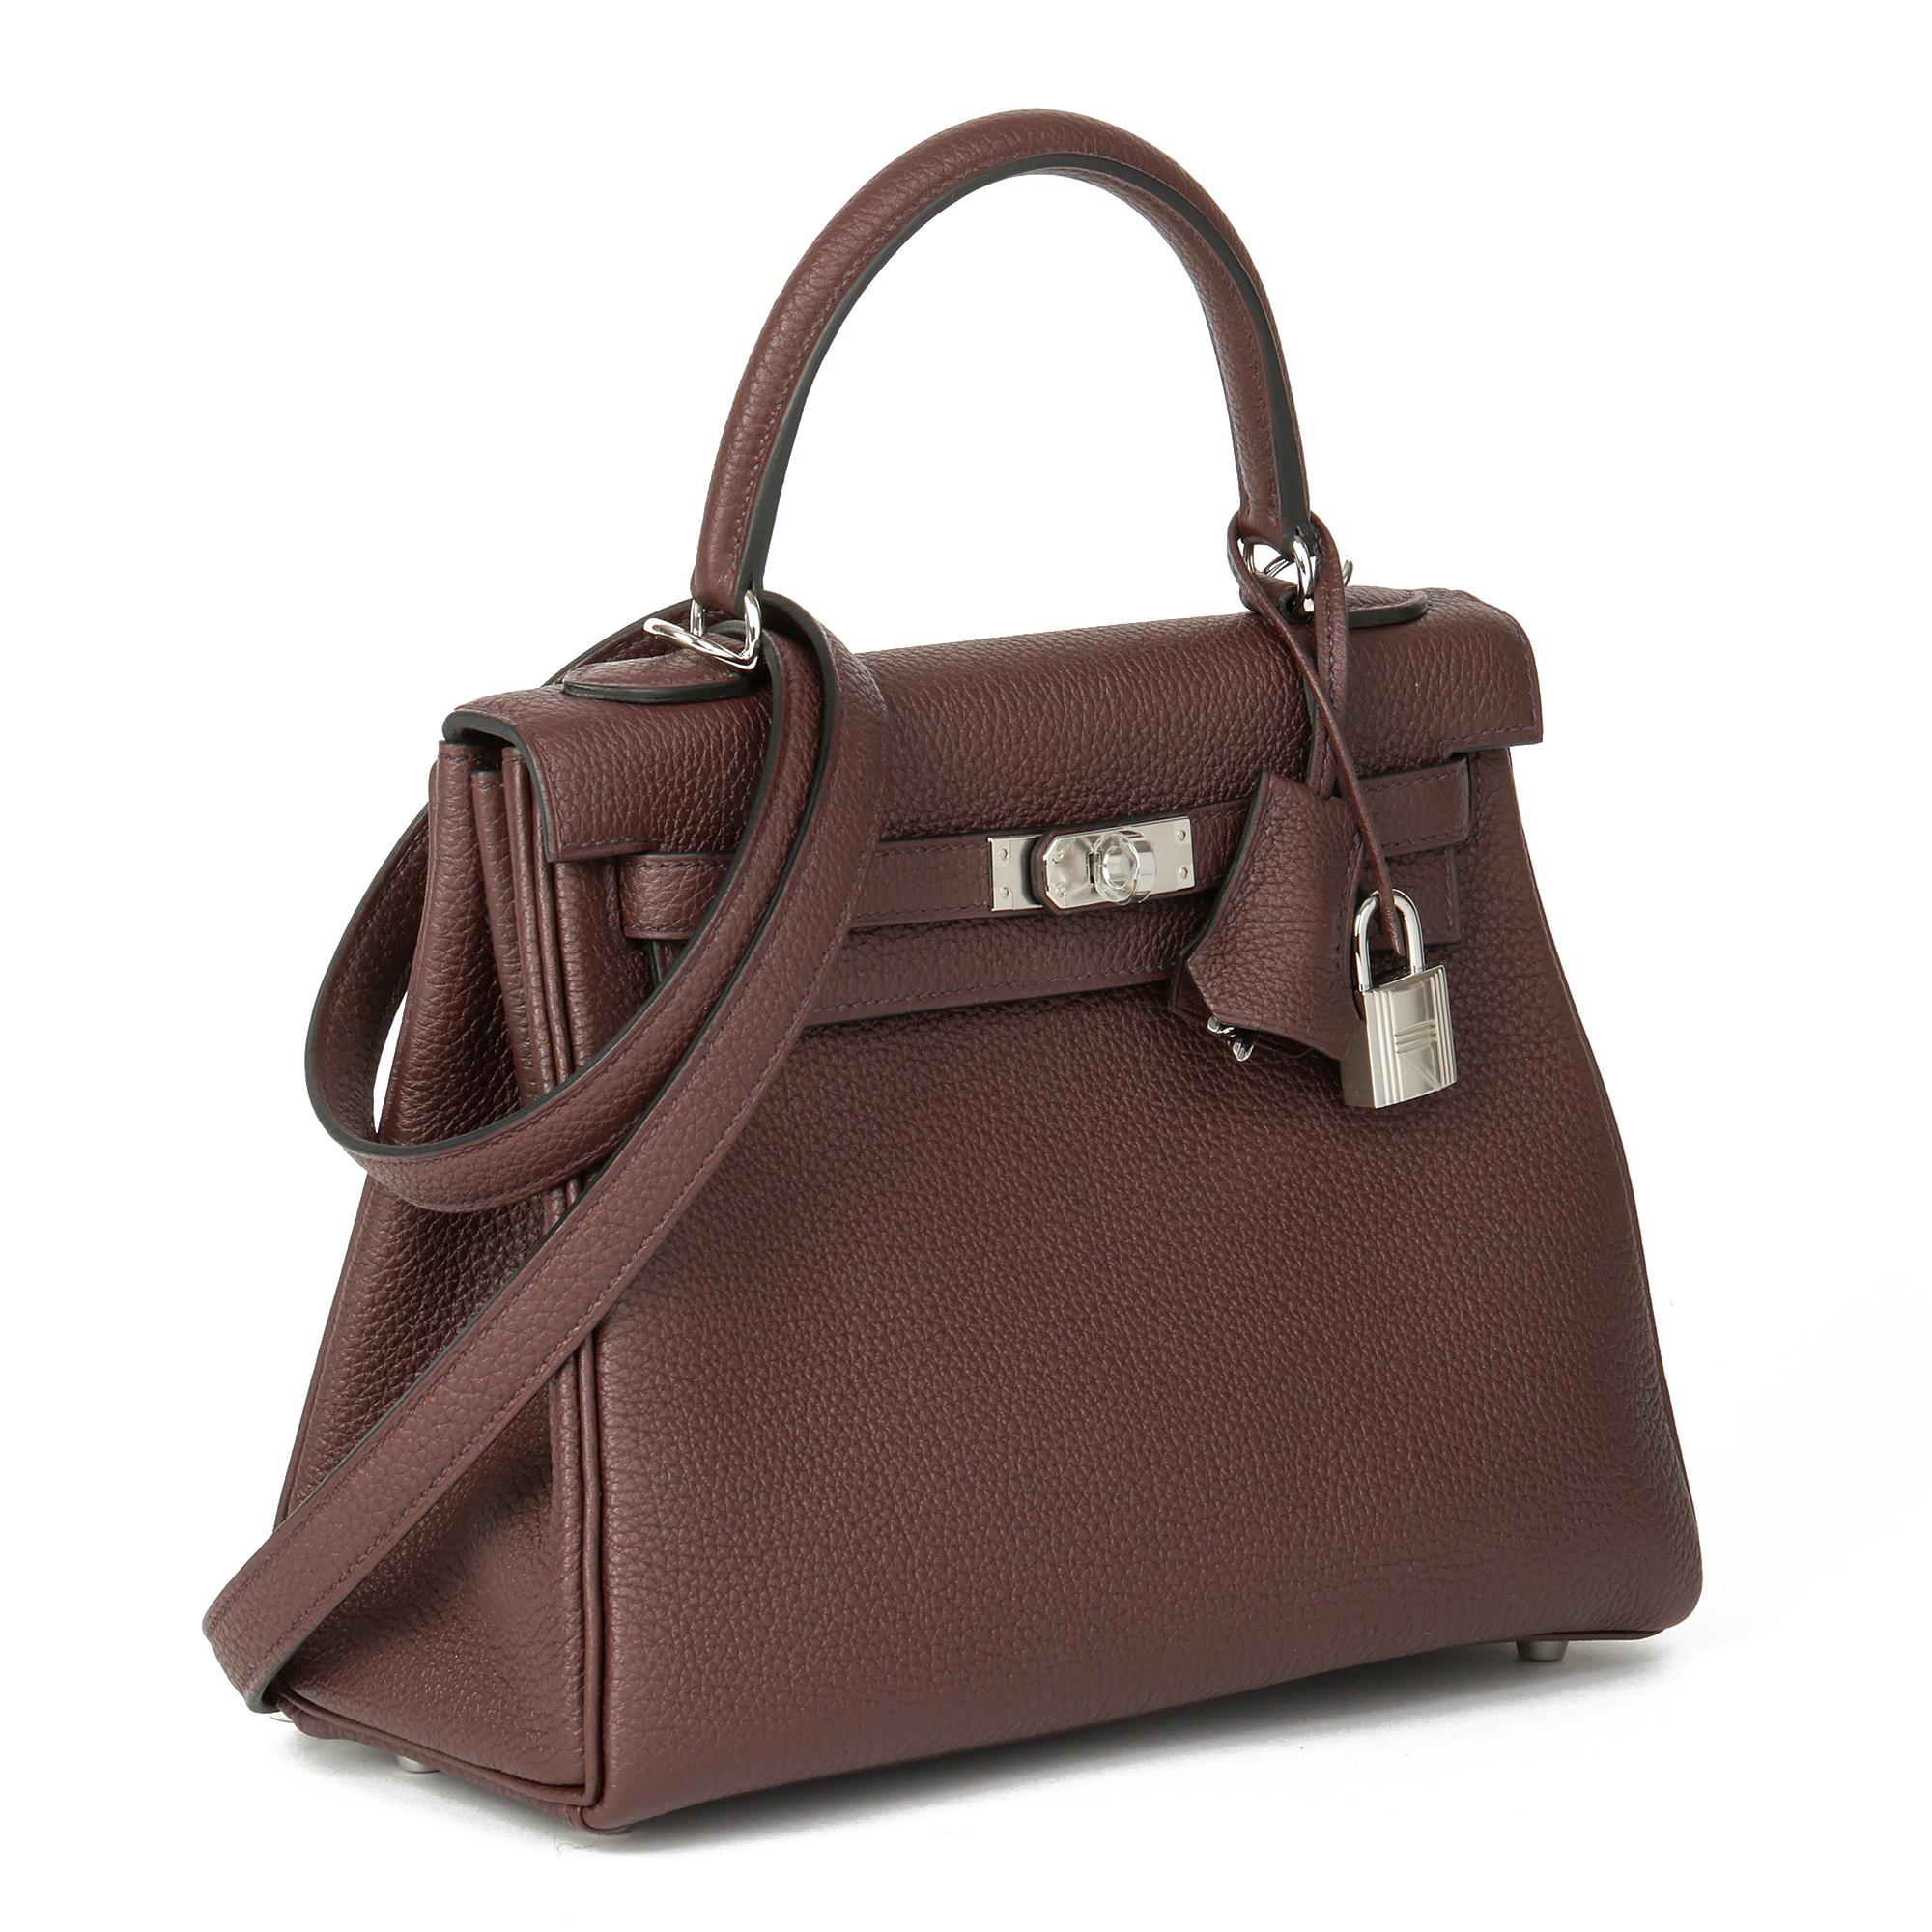 HERMÈS
Rouge Sellier Togo Leather Kelly 25cm Retourne

Xupes Reference: JJLG069
Serial Number: Z
Age (Circa): 2021
Accompanied By: Hermès Dust Bag, Box, Lock, Keys, Clochette, Rain Cover, Protective Felt, Shoulder Strap, Invoice, Care